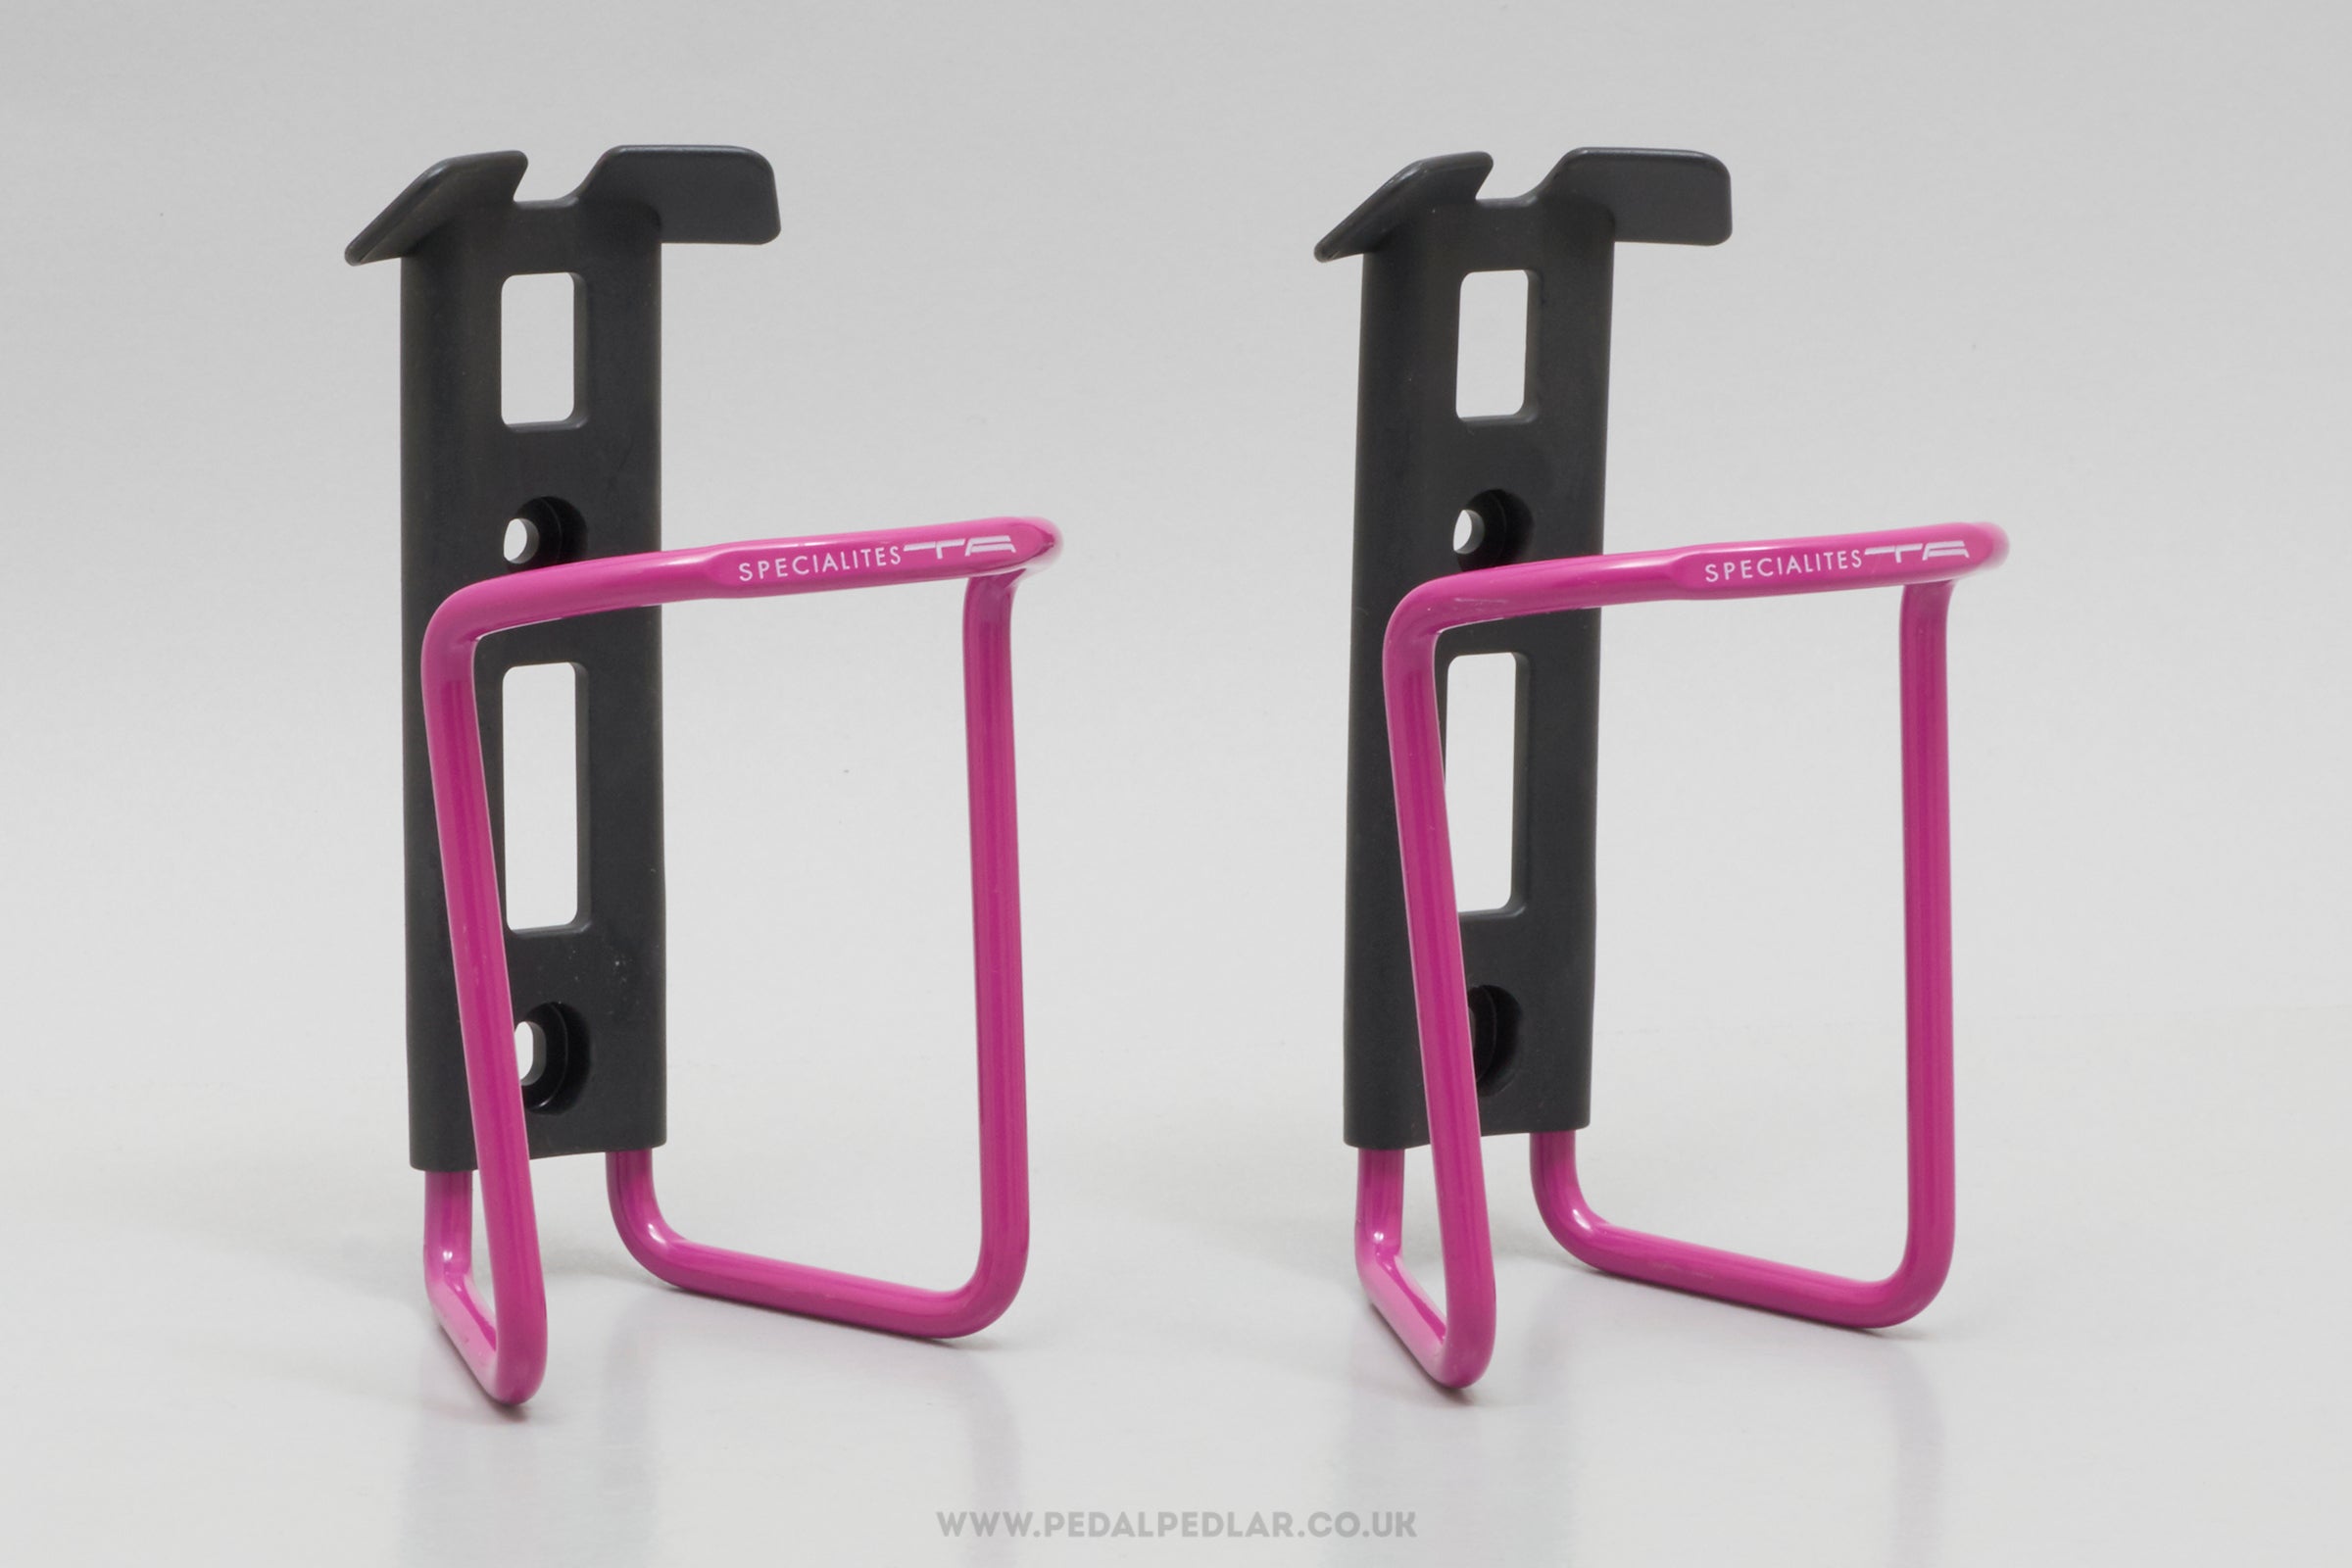 Specialites T.A. Sierra NOS Classic Purple Bottle Cages - Pedal Pedlar - Buy New Old Stock Cycle Accessories